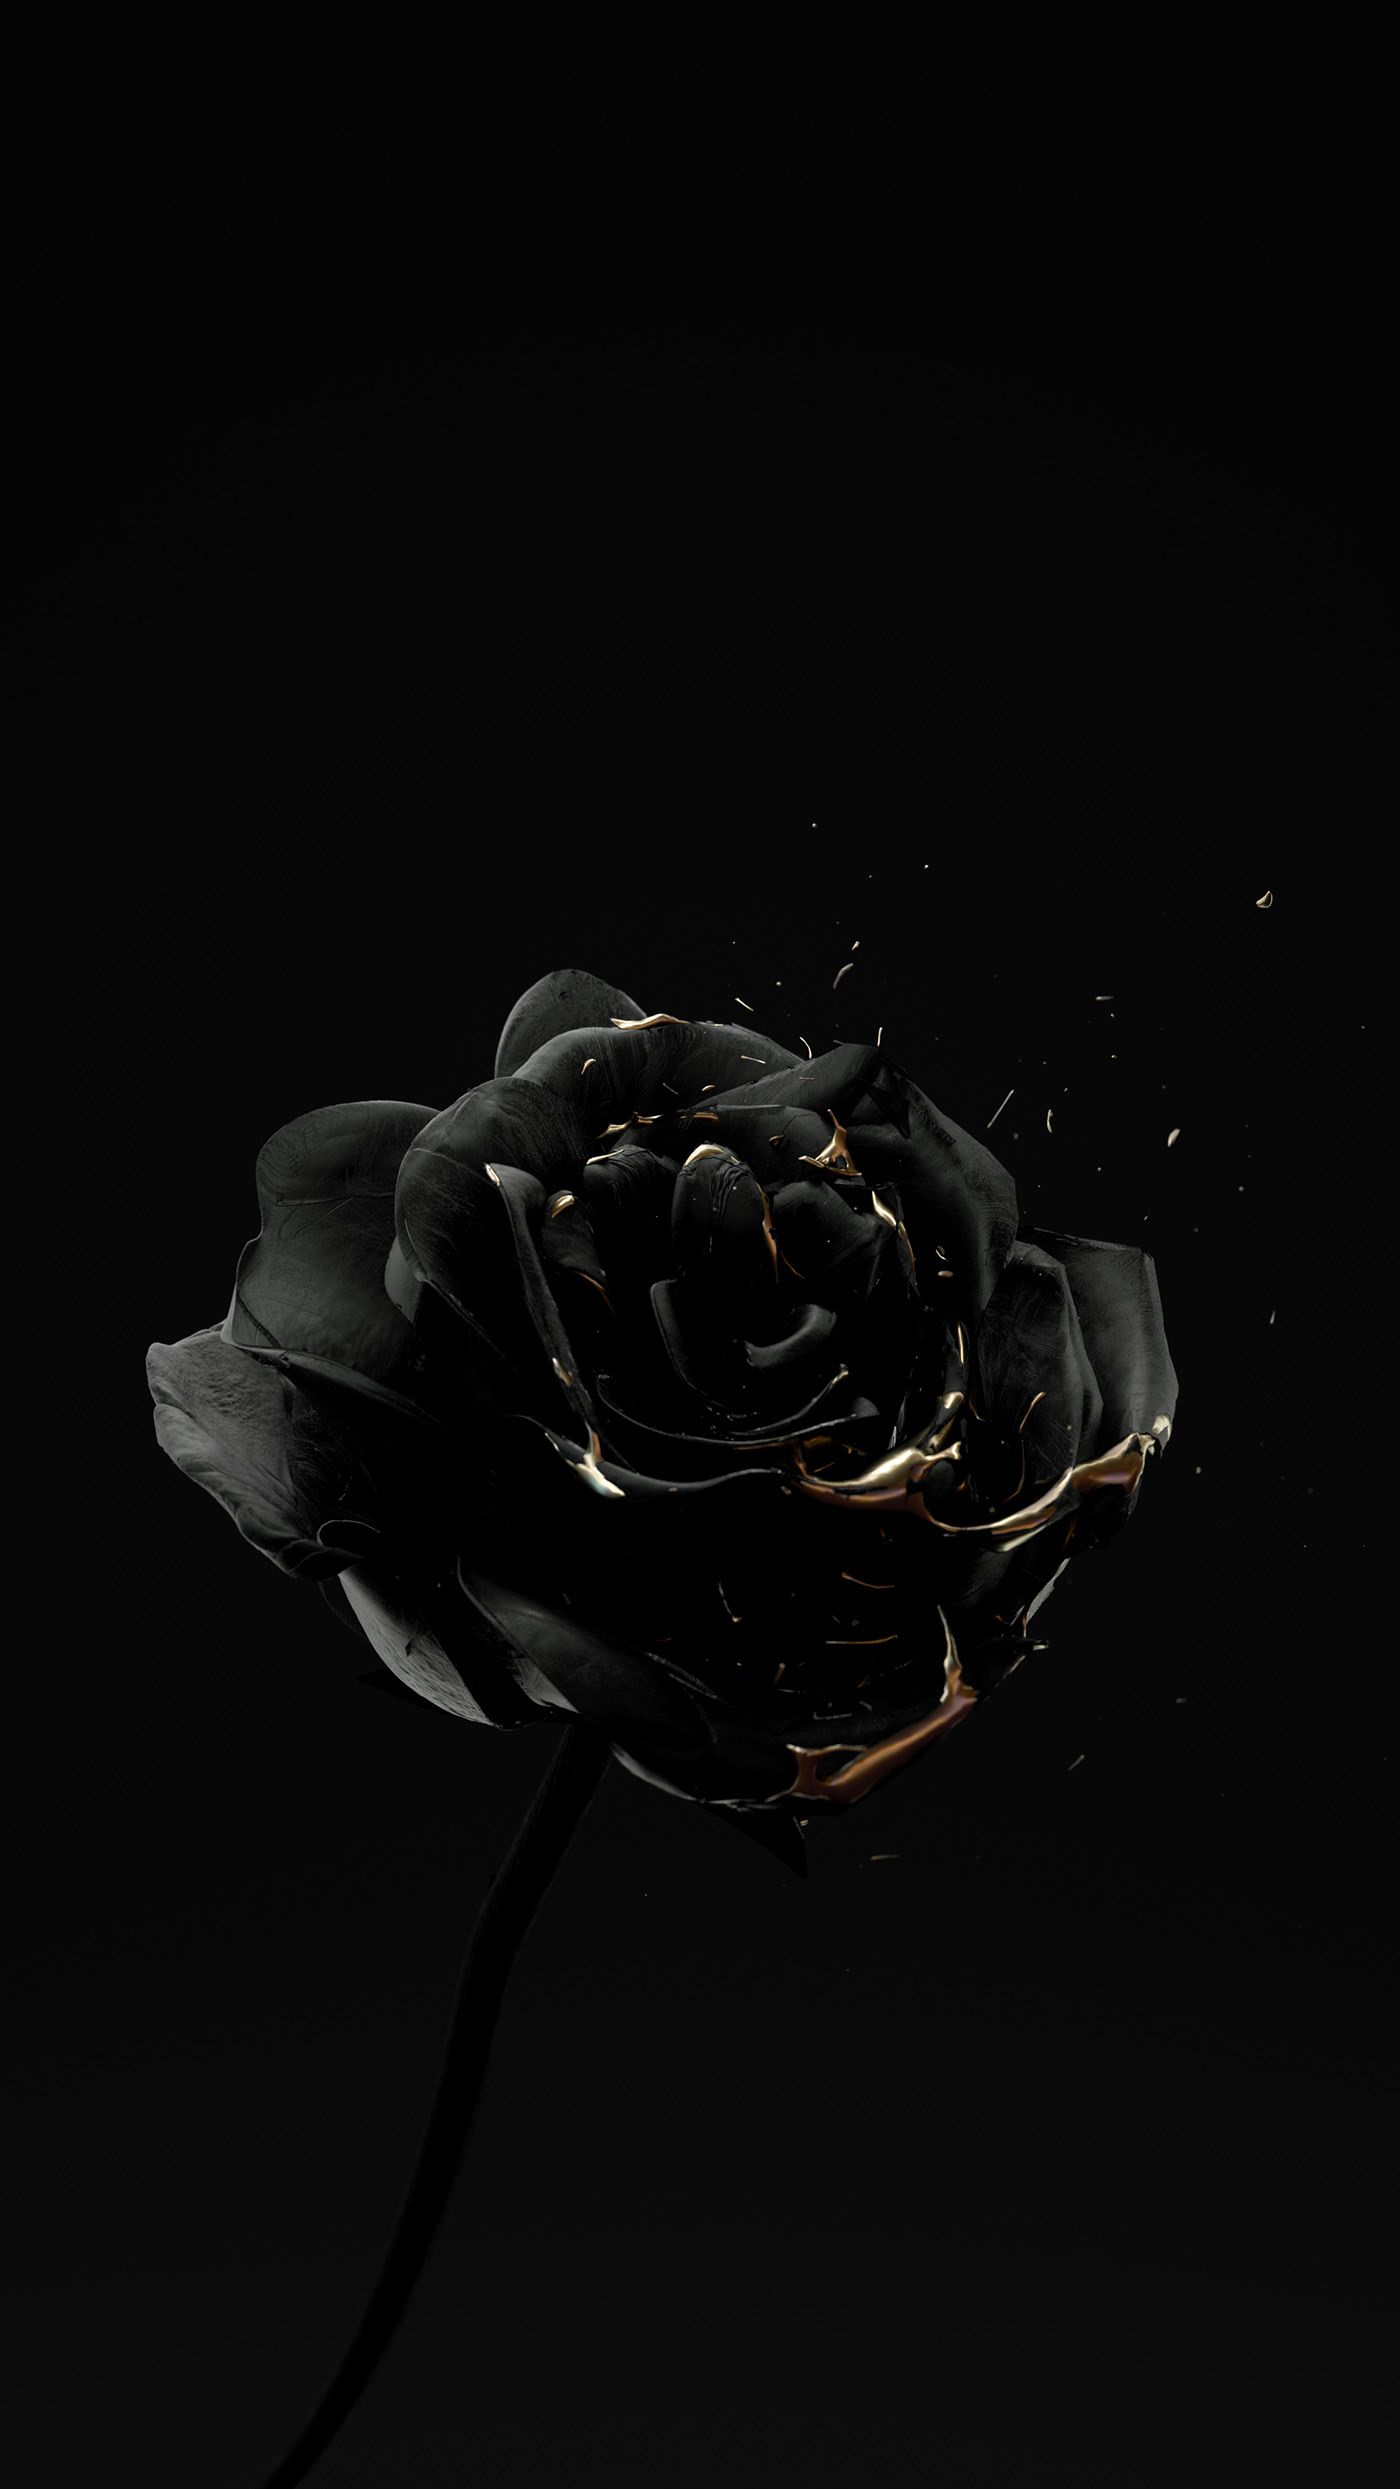 Roses Are Dead – Vol. 4 “Black and Gold”